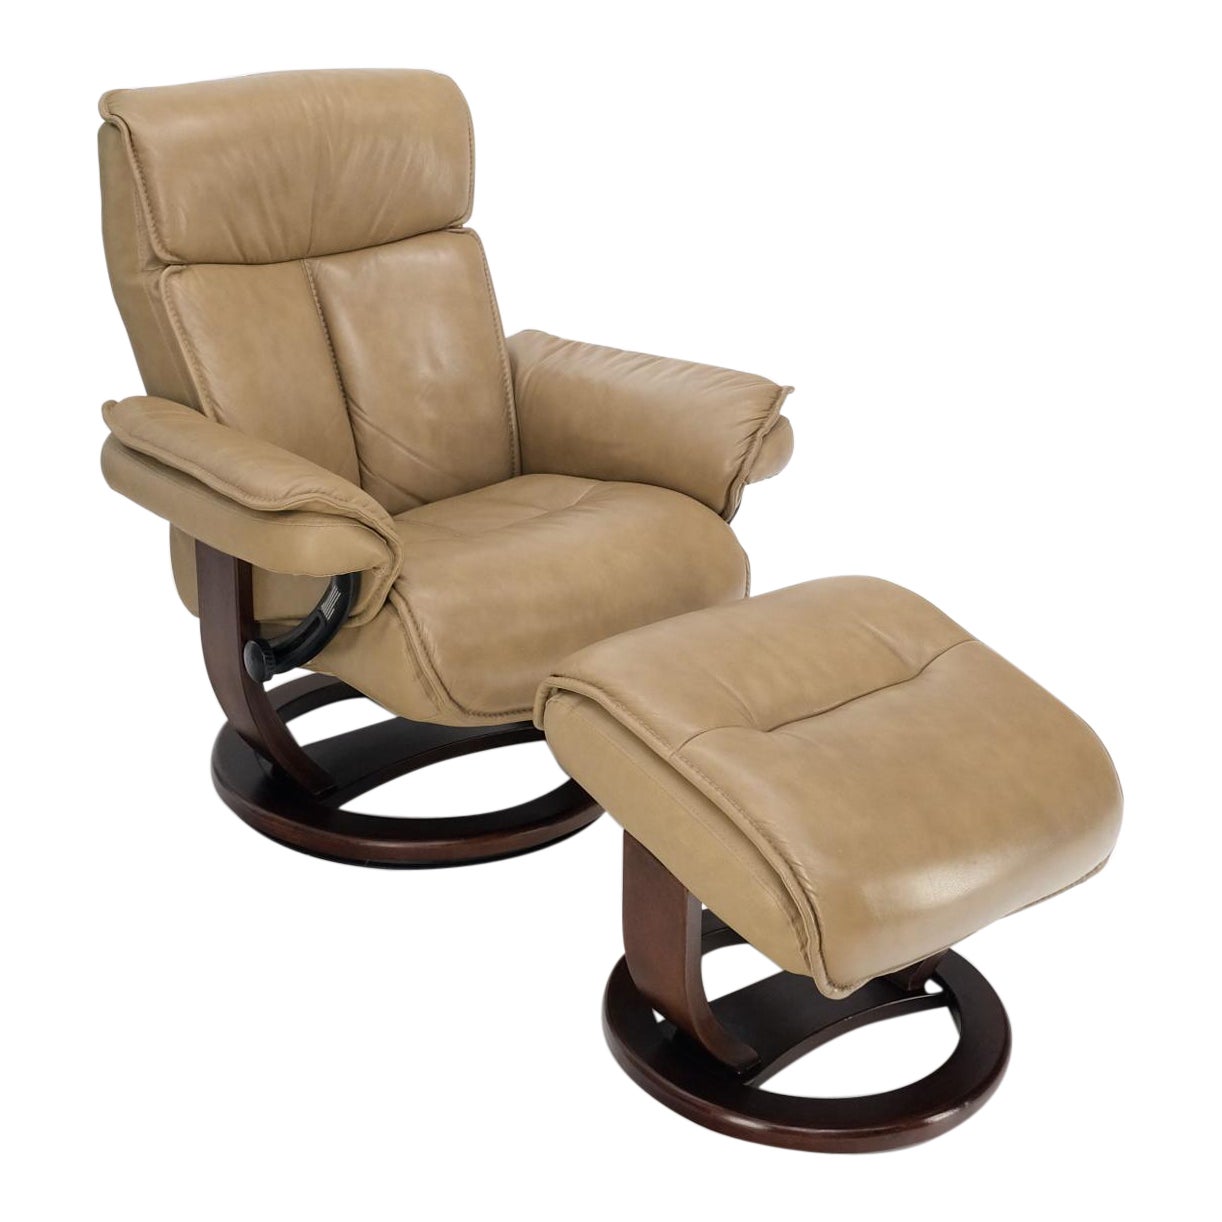 What is the best leather recliner chair?